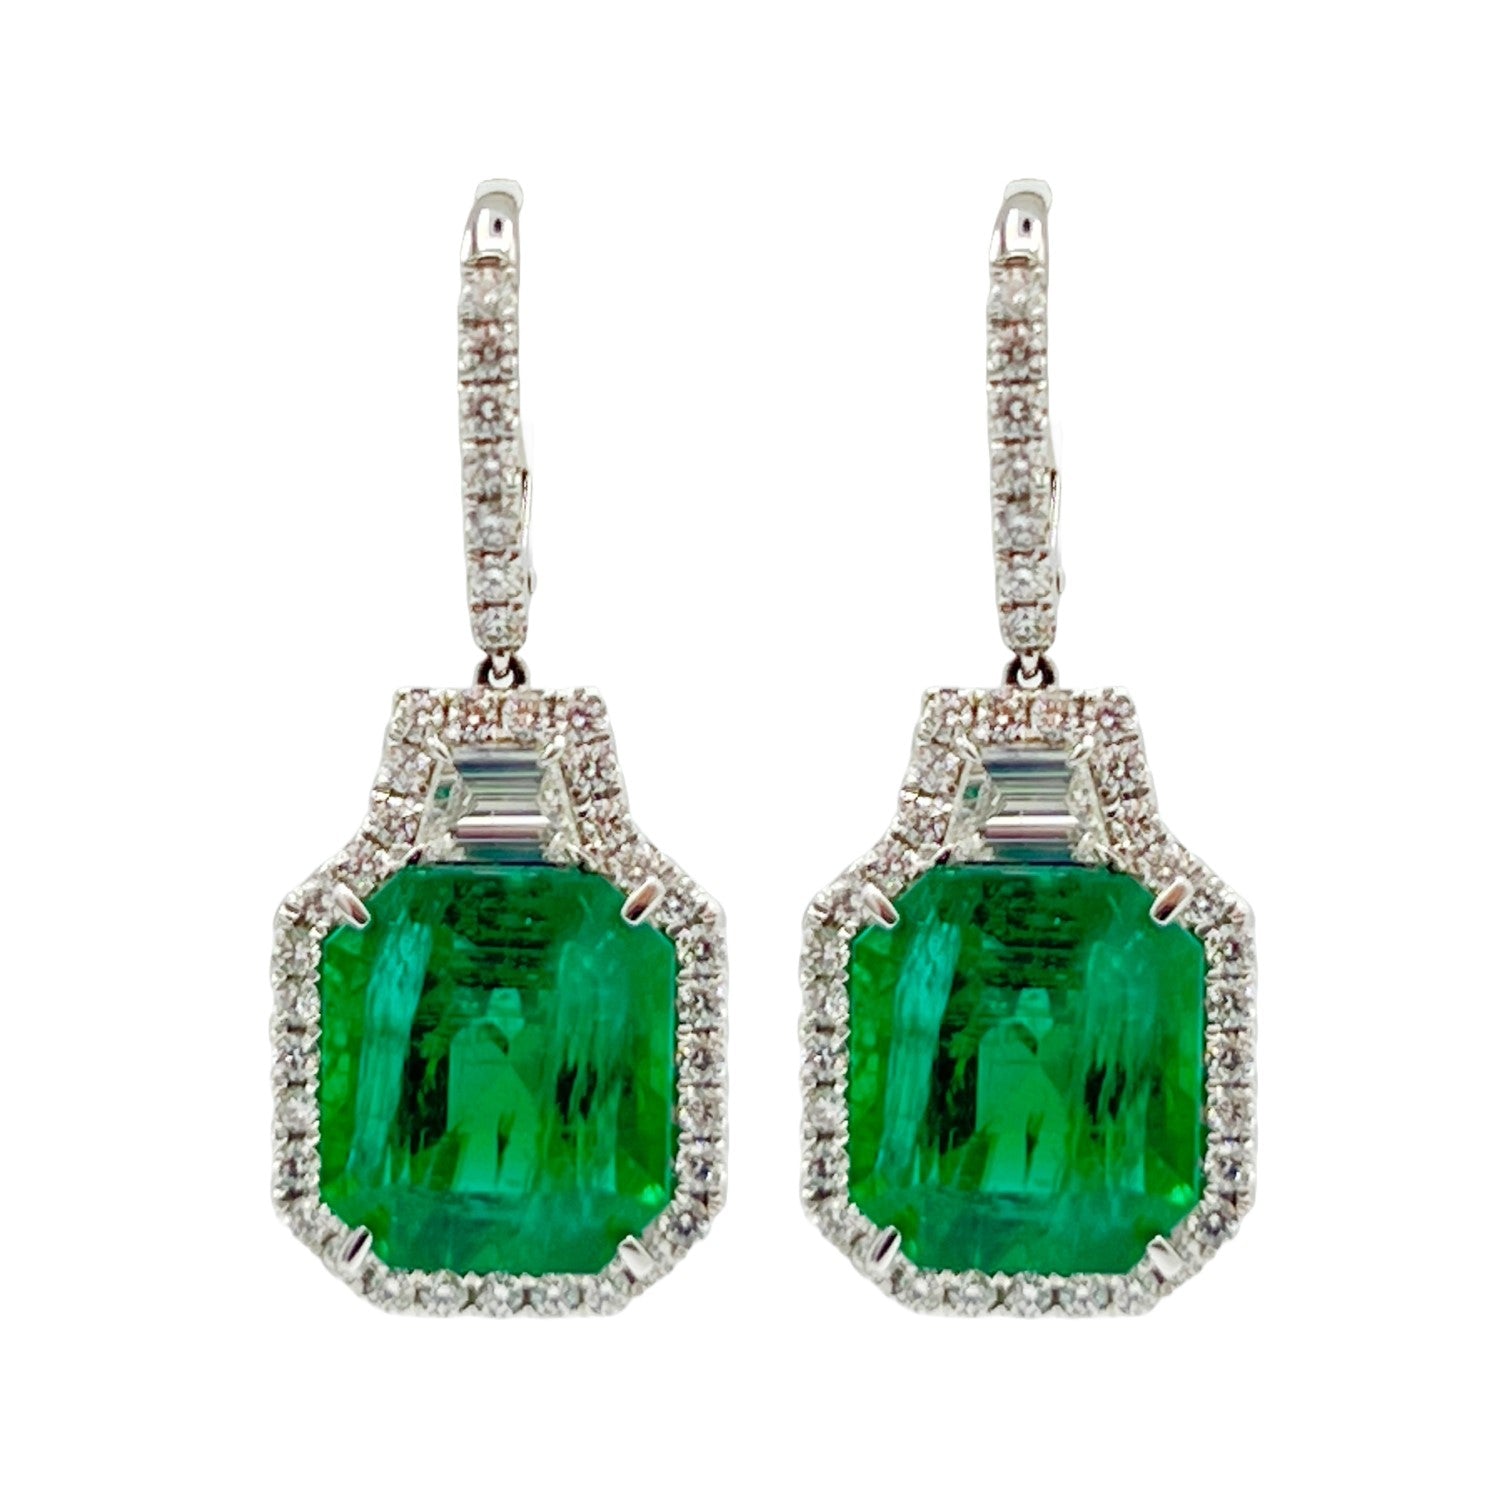 Earrings 18KW/7.0G 2EMER-13.55CT 2TRAP-0.58CT 80RD-1.09CT